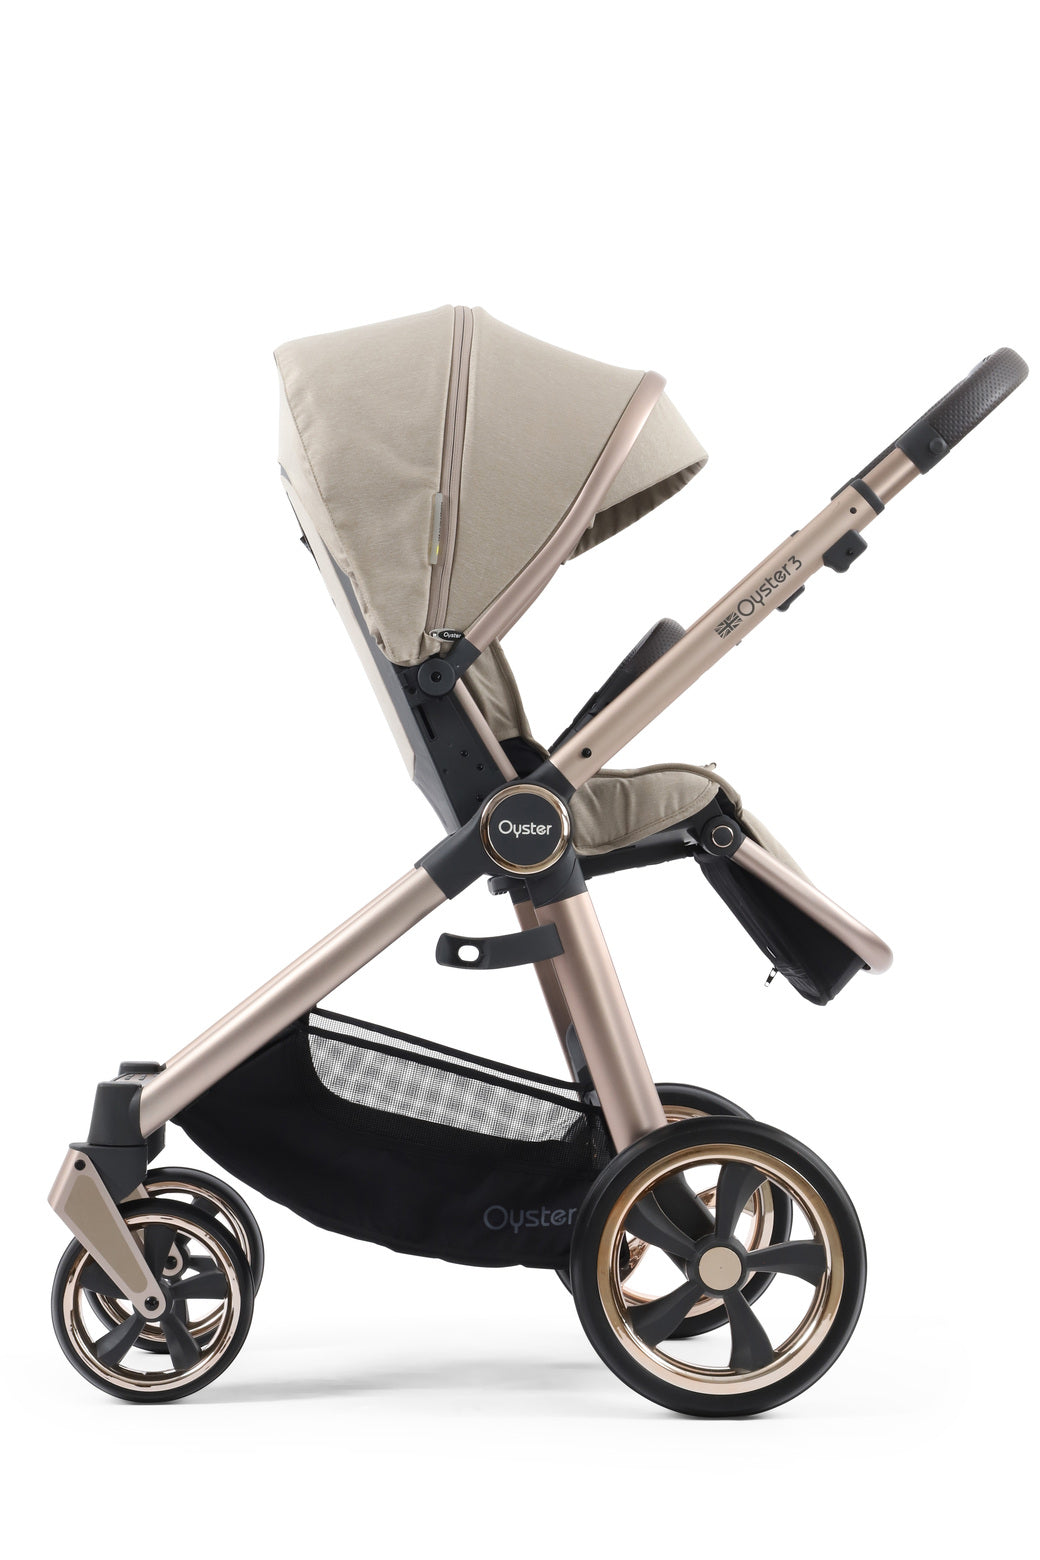 Babystyle Oyster 3 Ultimate 12 Piece Travel System Bundle - Creme Brulee -  | For Your Little One